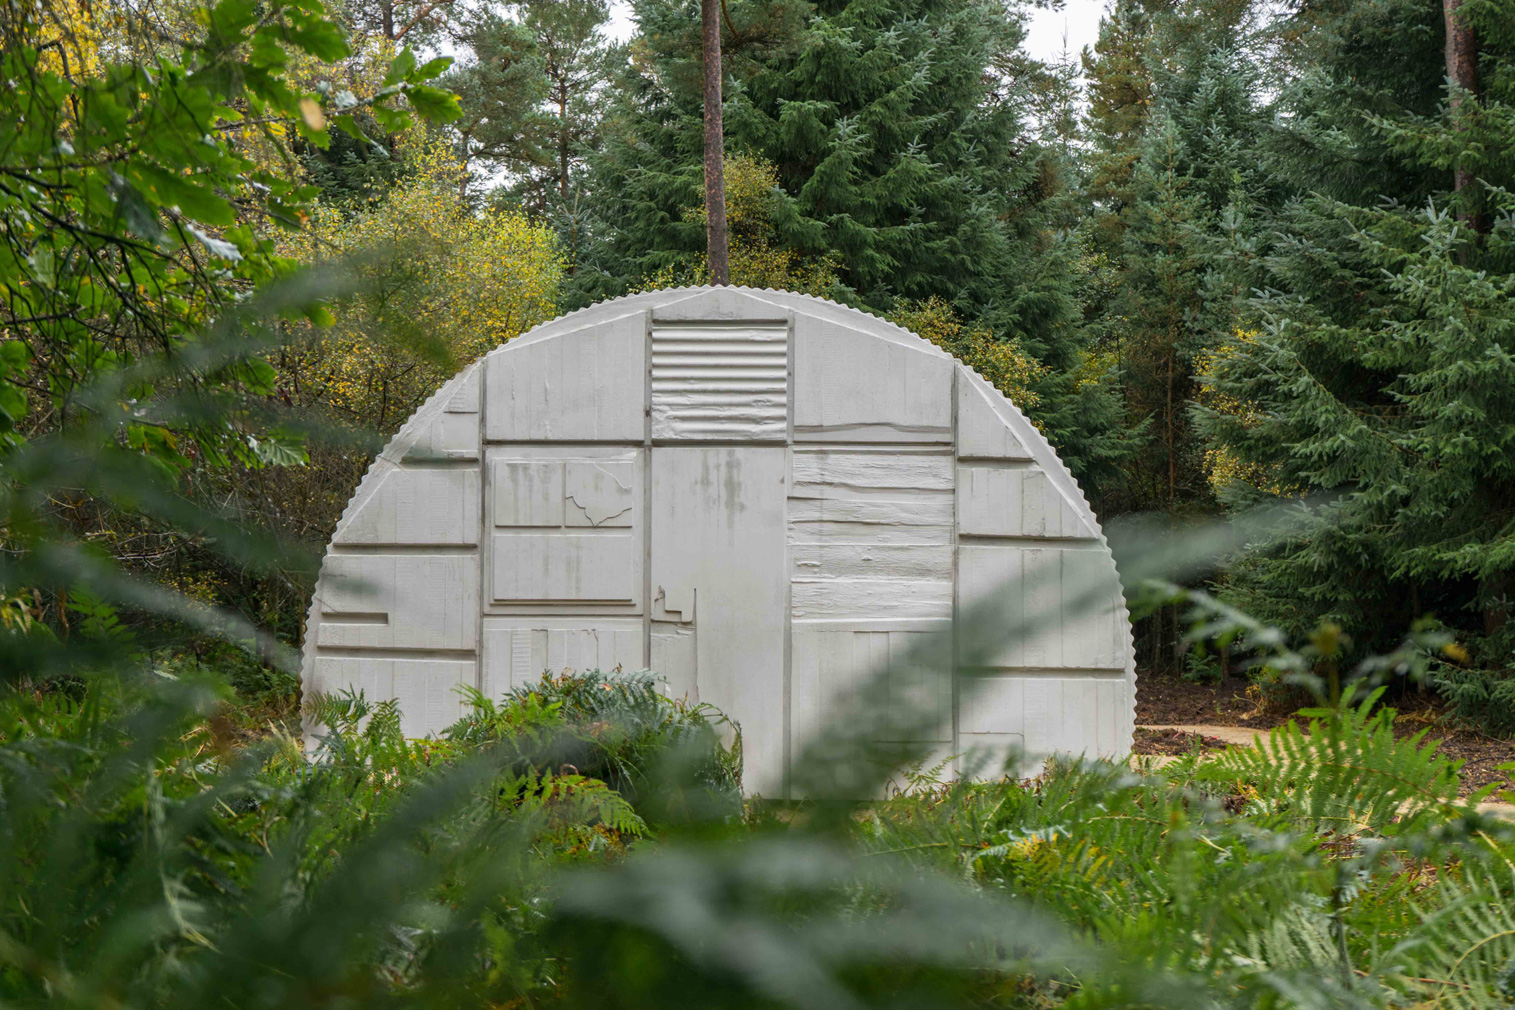 Rachel Whiteread builds a concrete military hut in a Yorkshire forest